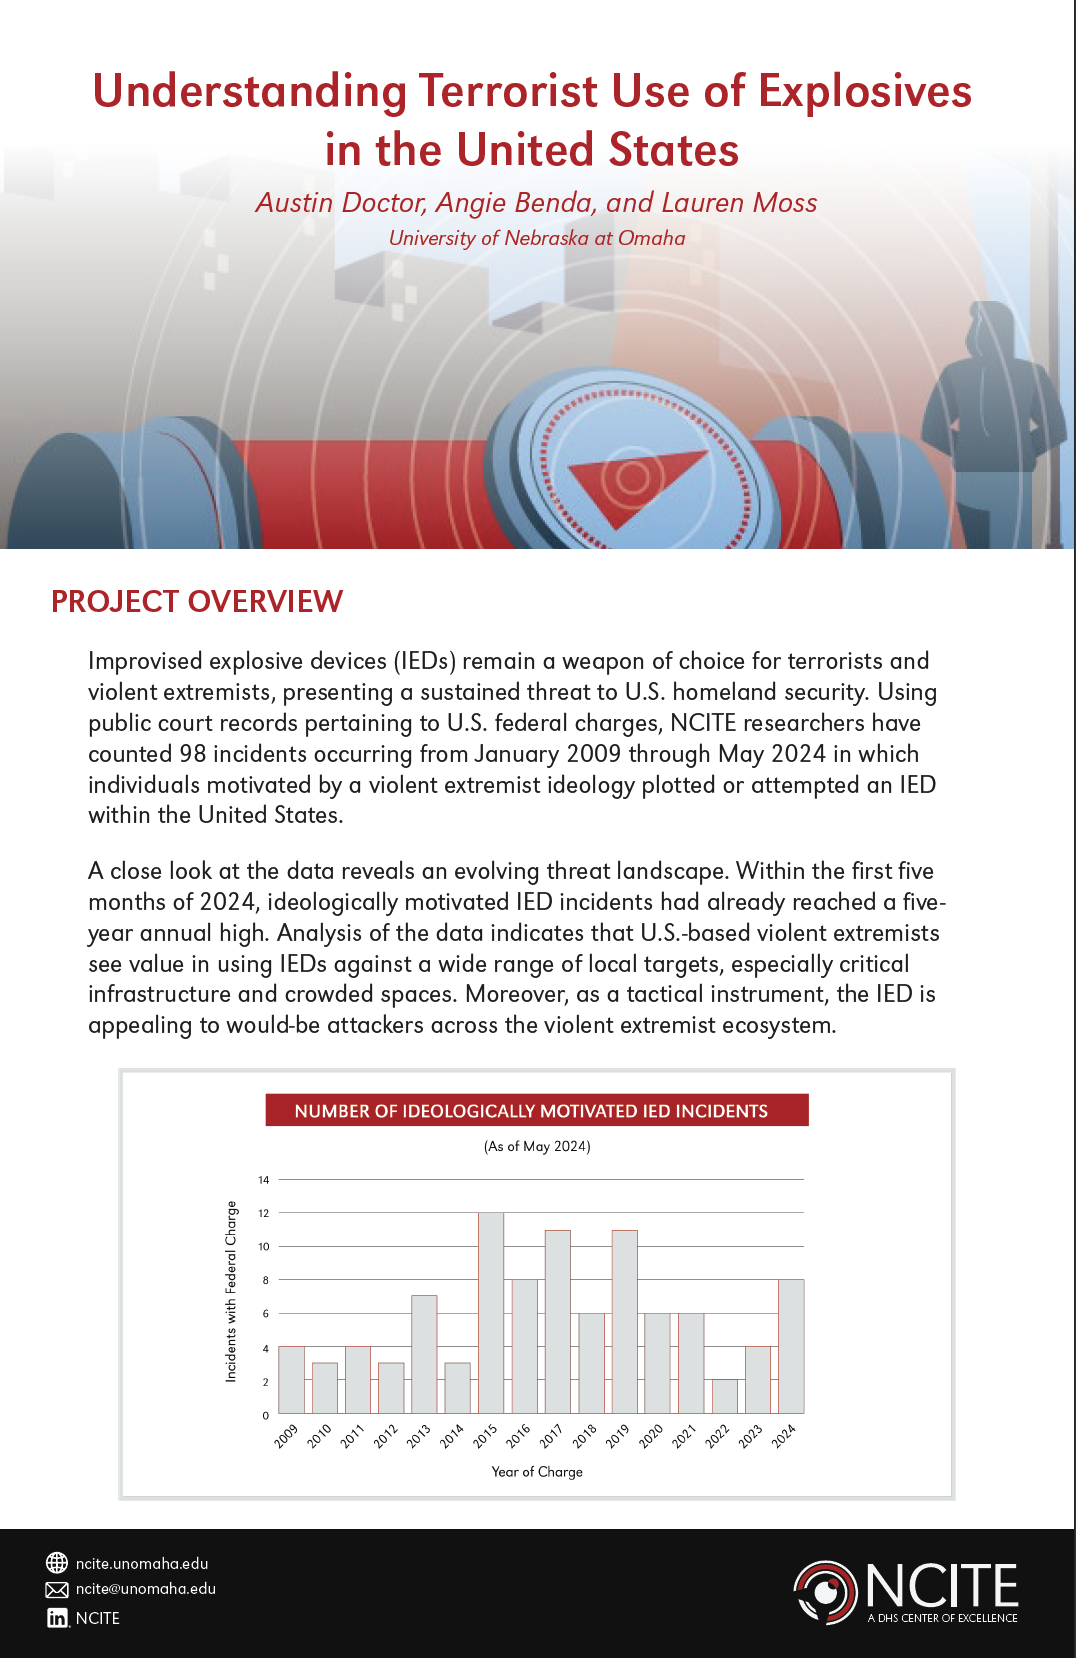 A cover image giving an overview of the project on understanding terrorist use of explosives in the U.S.